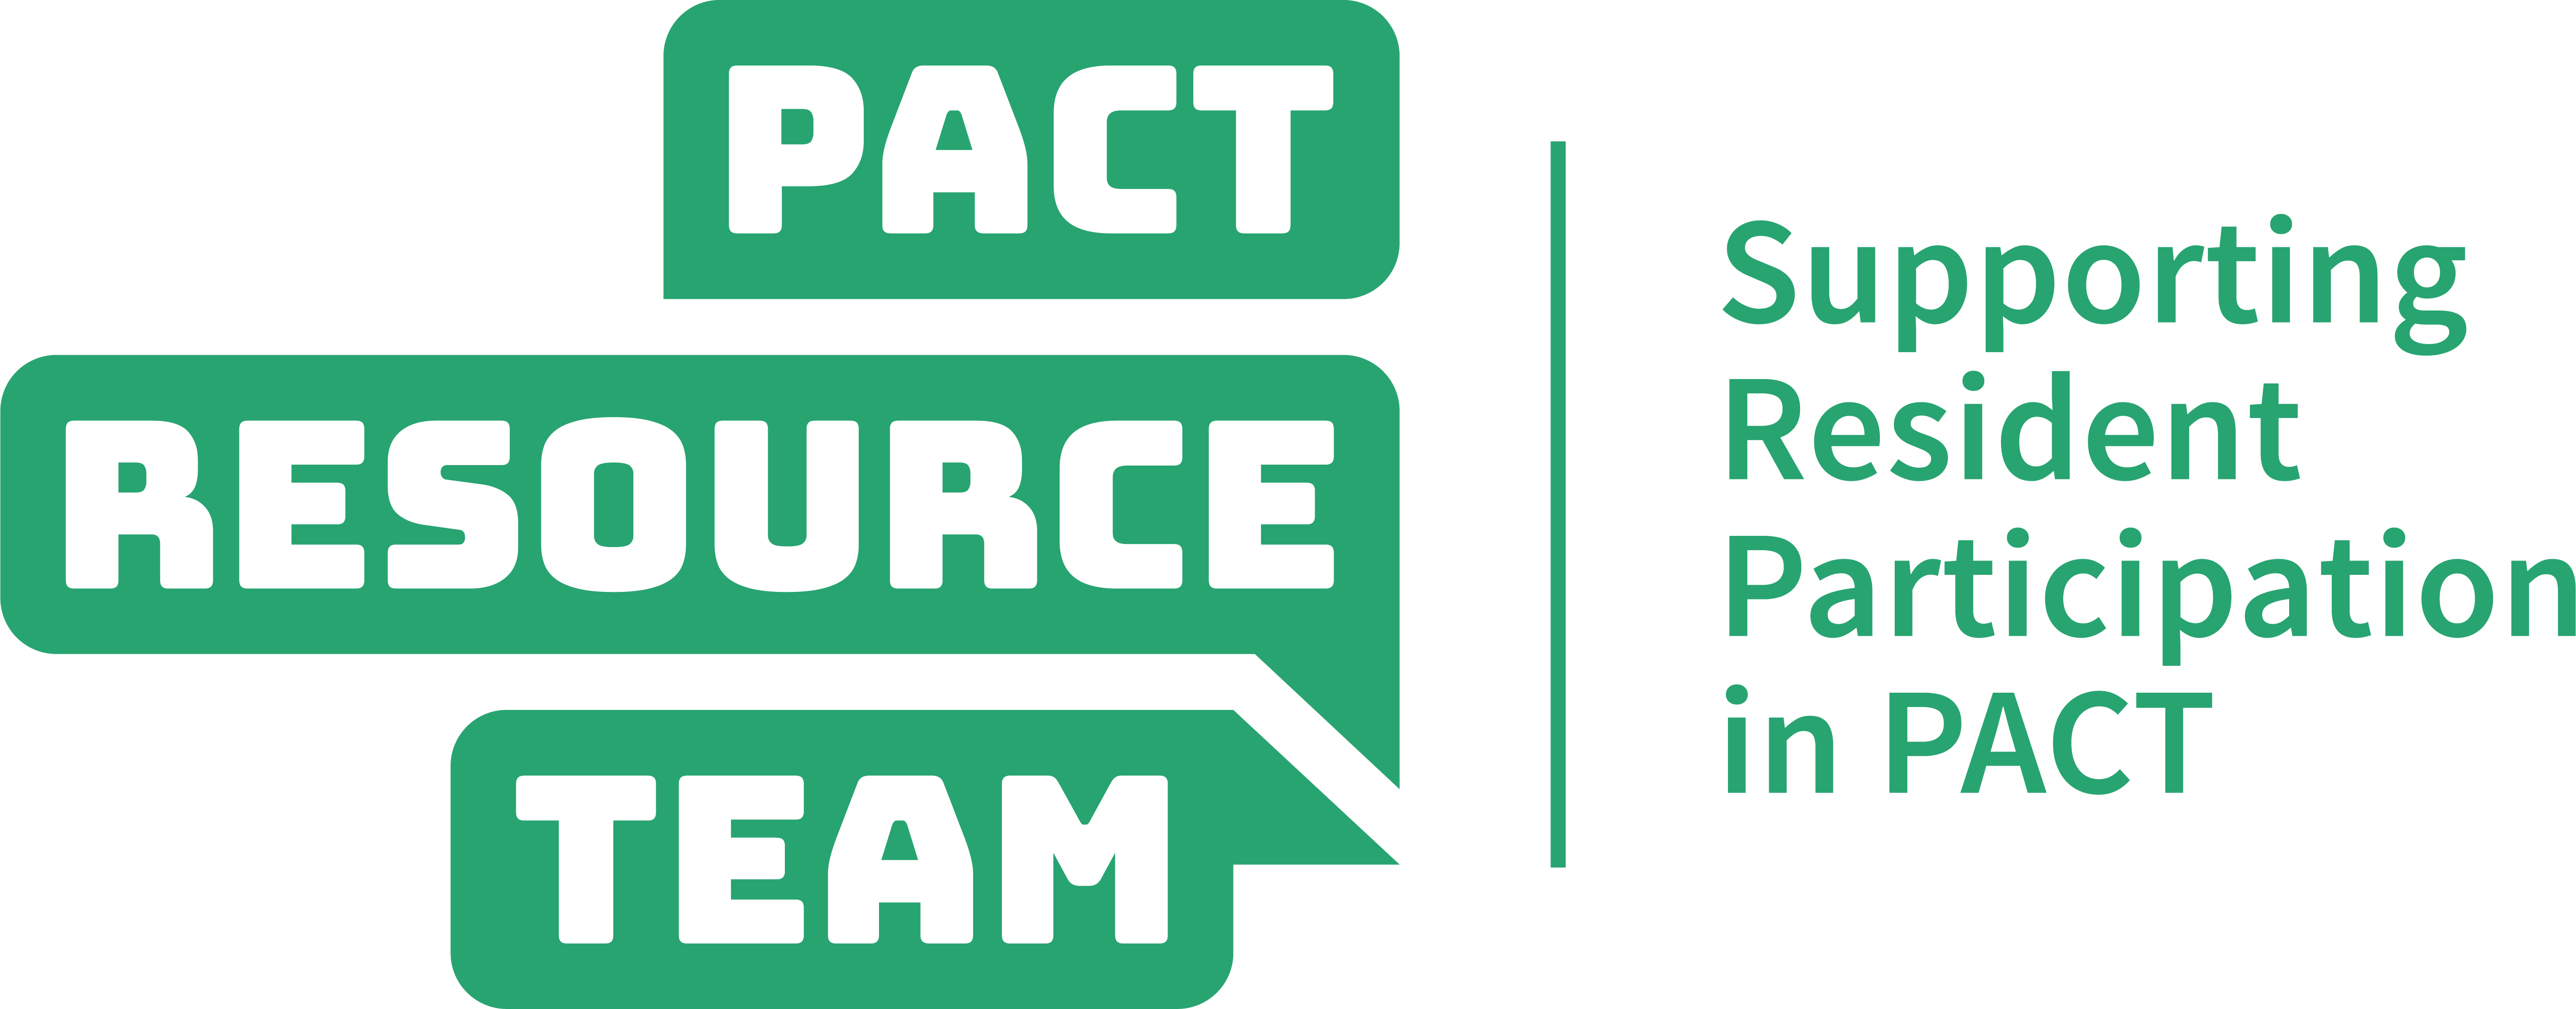 Request for Qualifications (RFQ)PACT Resource Team Technical Assistance ...